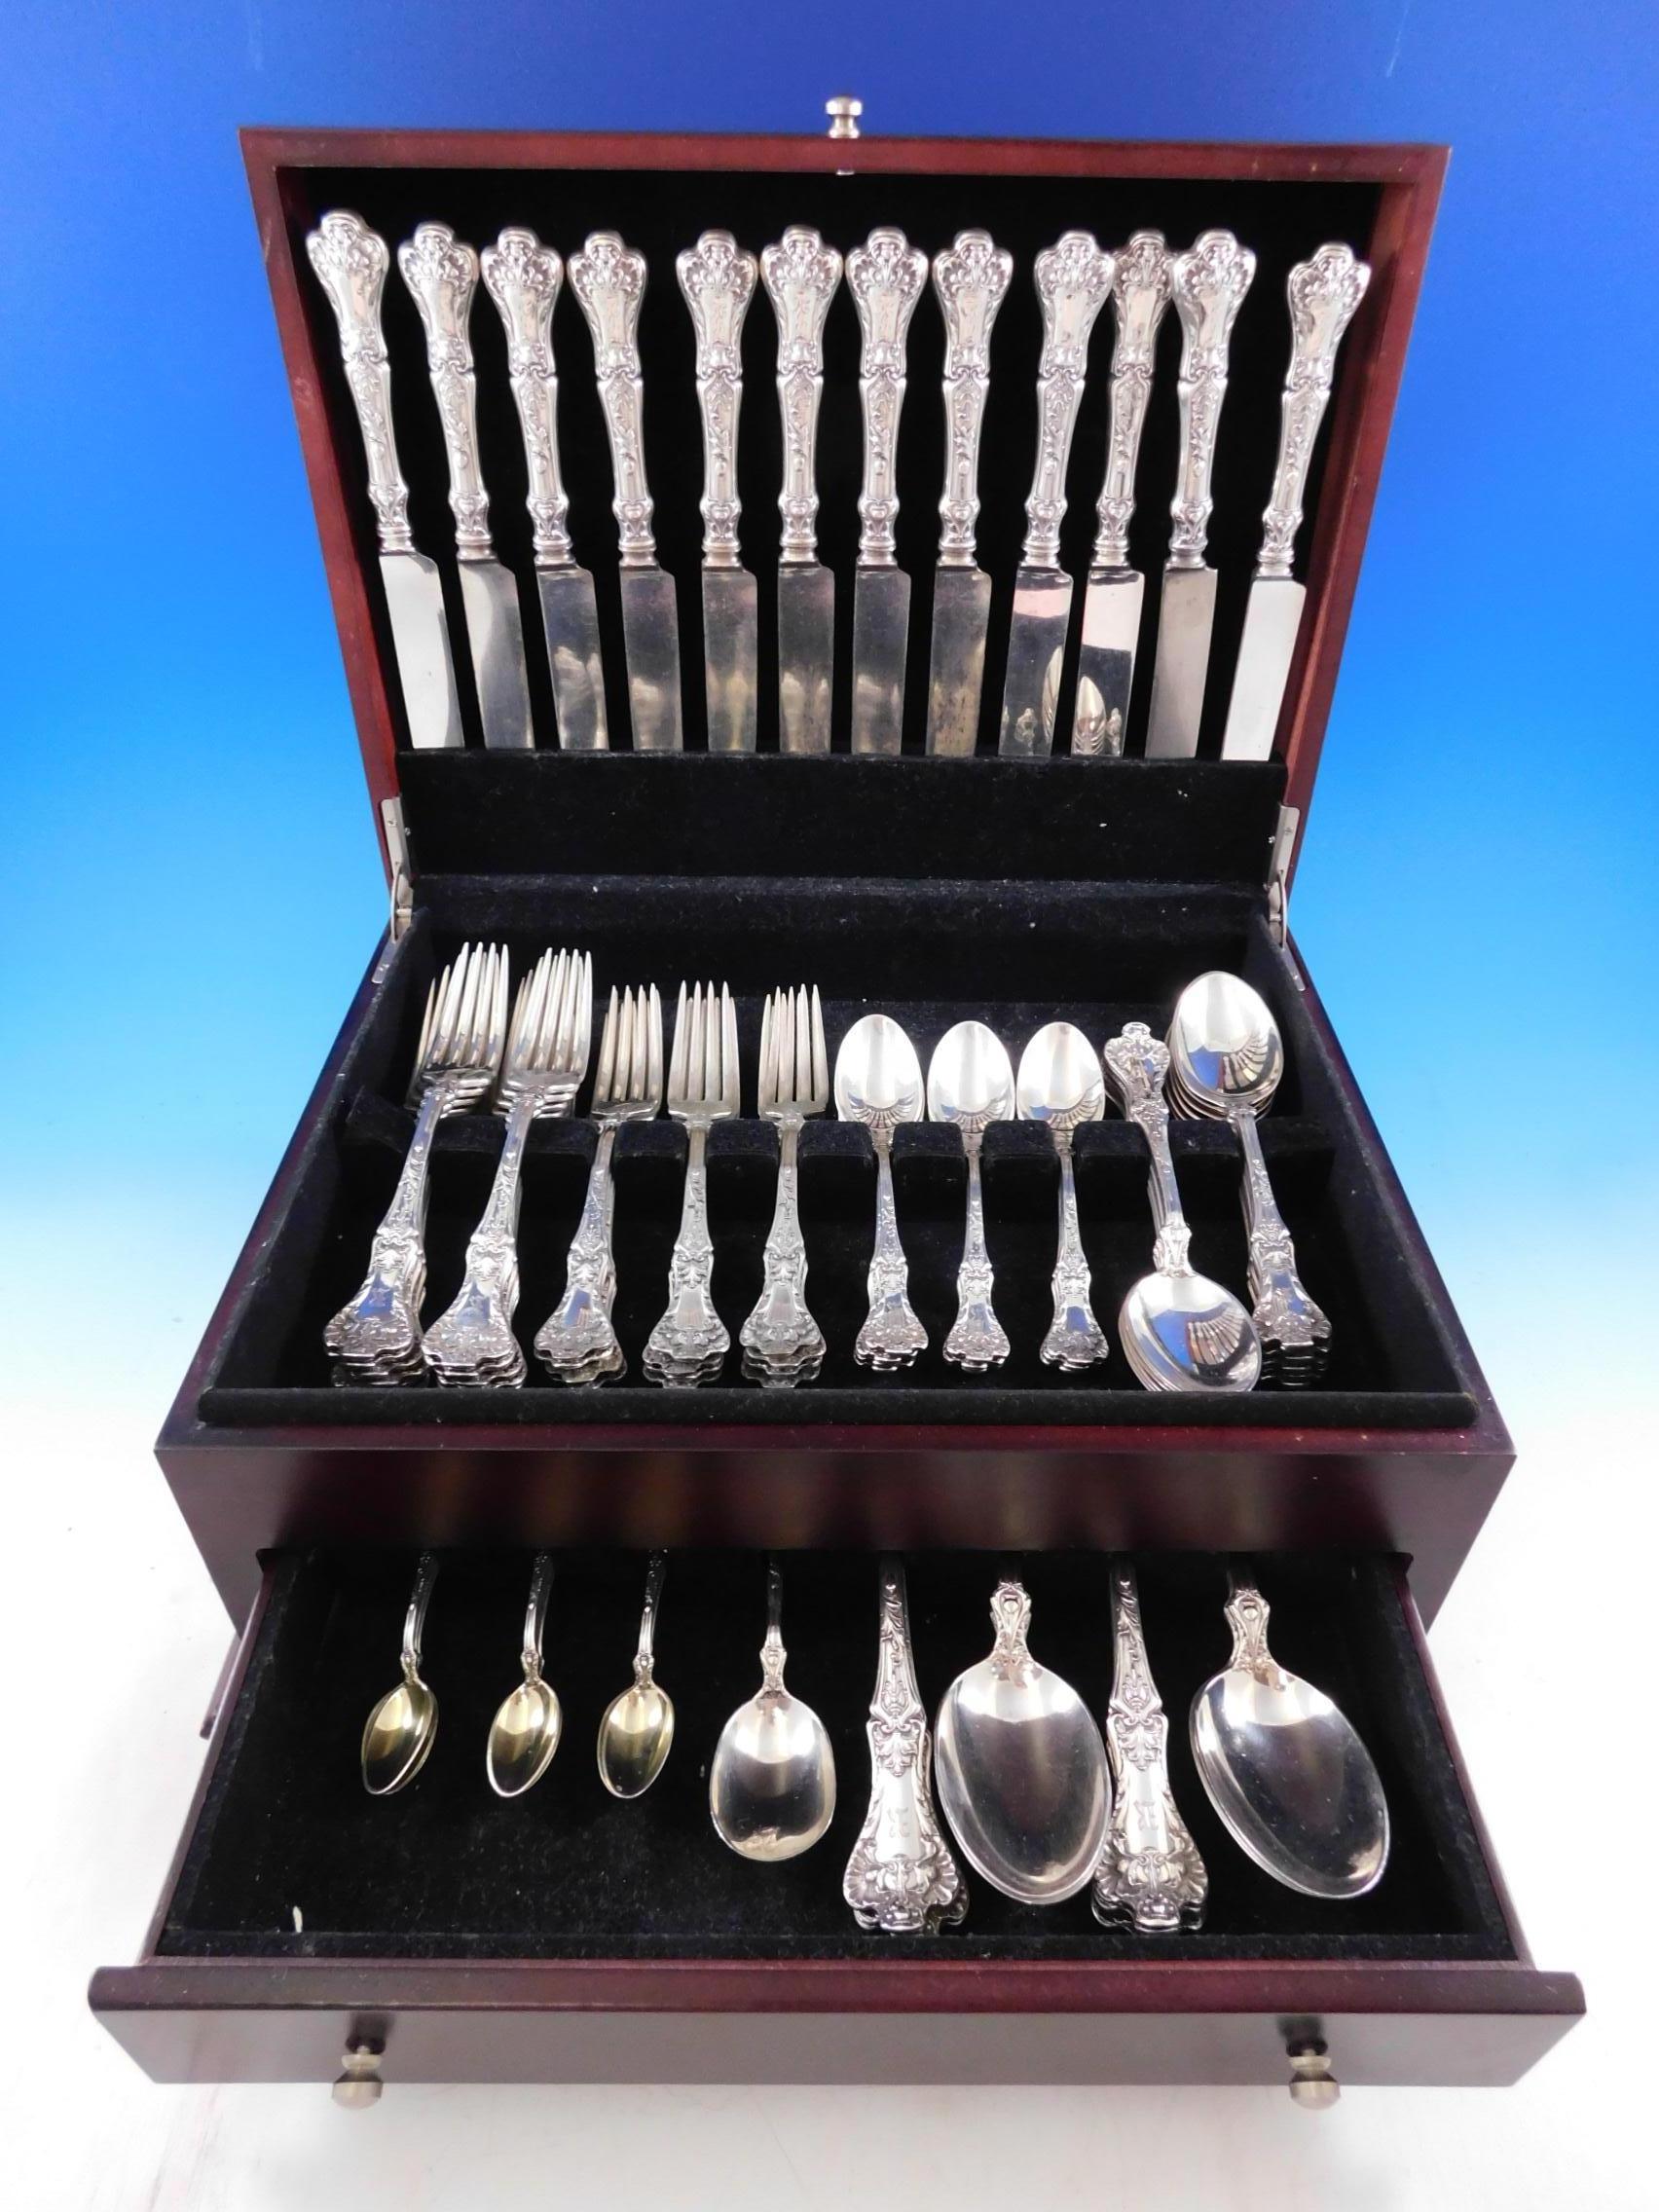 Dinner size Art Nouveau Patrician by Gorham, circa 1901, sterling silver flatware, 83 pieces. This set includes:

12 dinner size knives w/blunt plated blades, 9 5/8